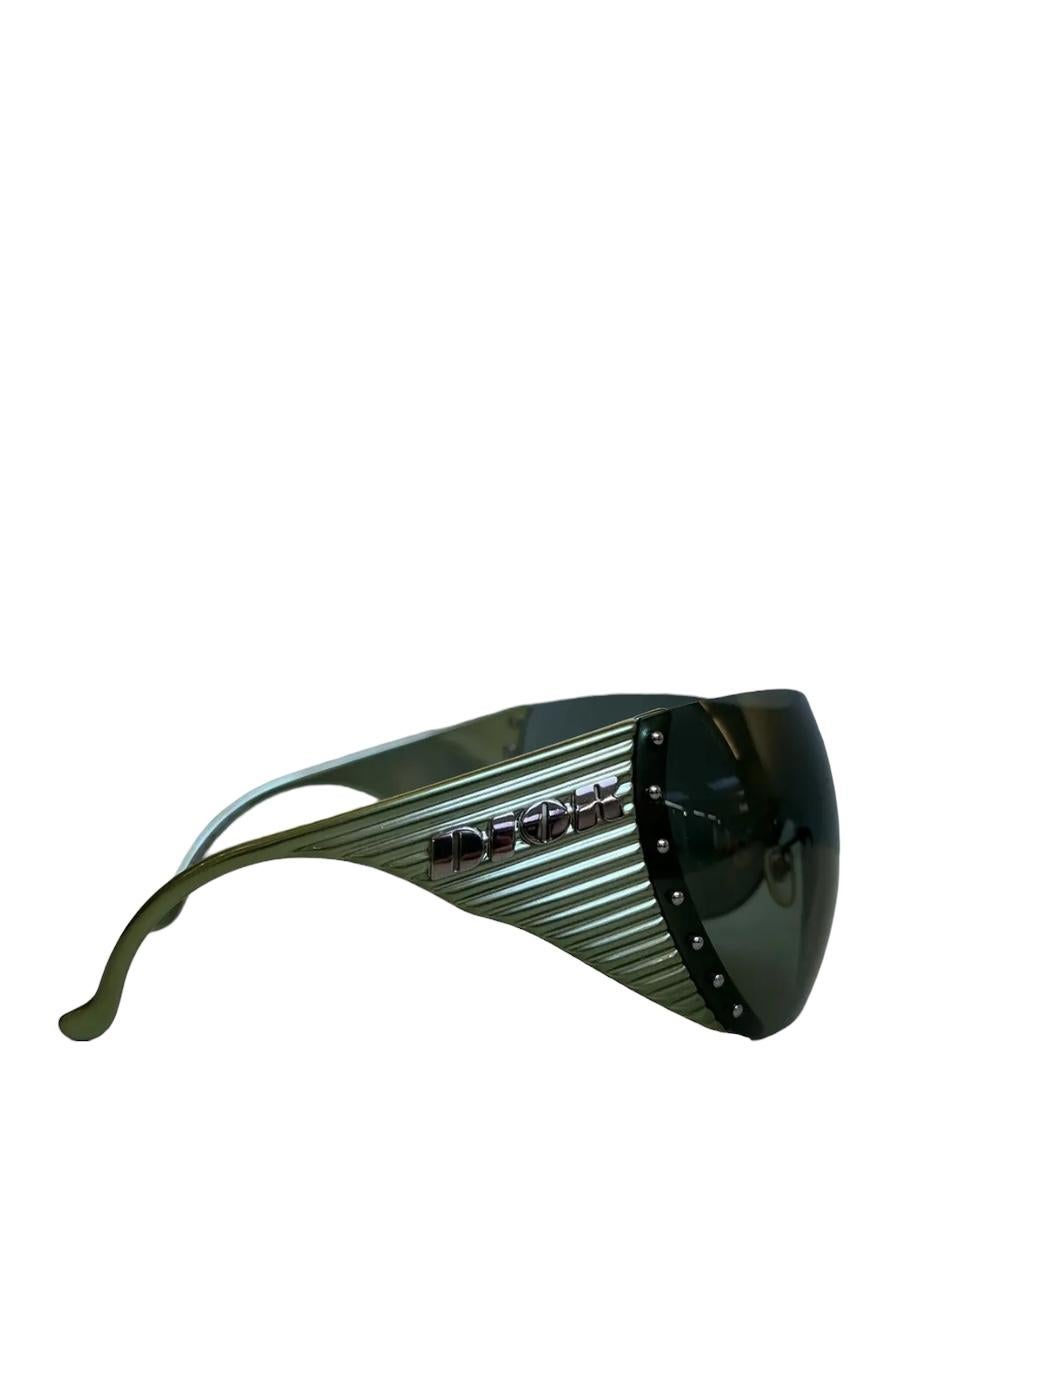 Dior Bike 1 Green Oversized Mask Sunglasses In Good Condition For Sale In LISSE, NL